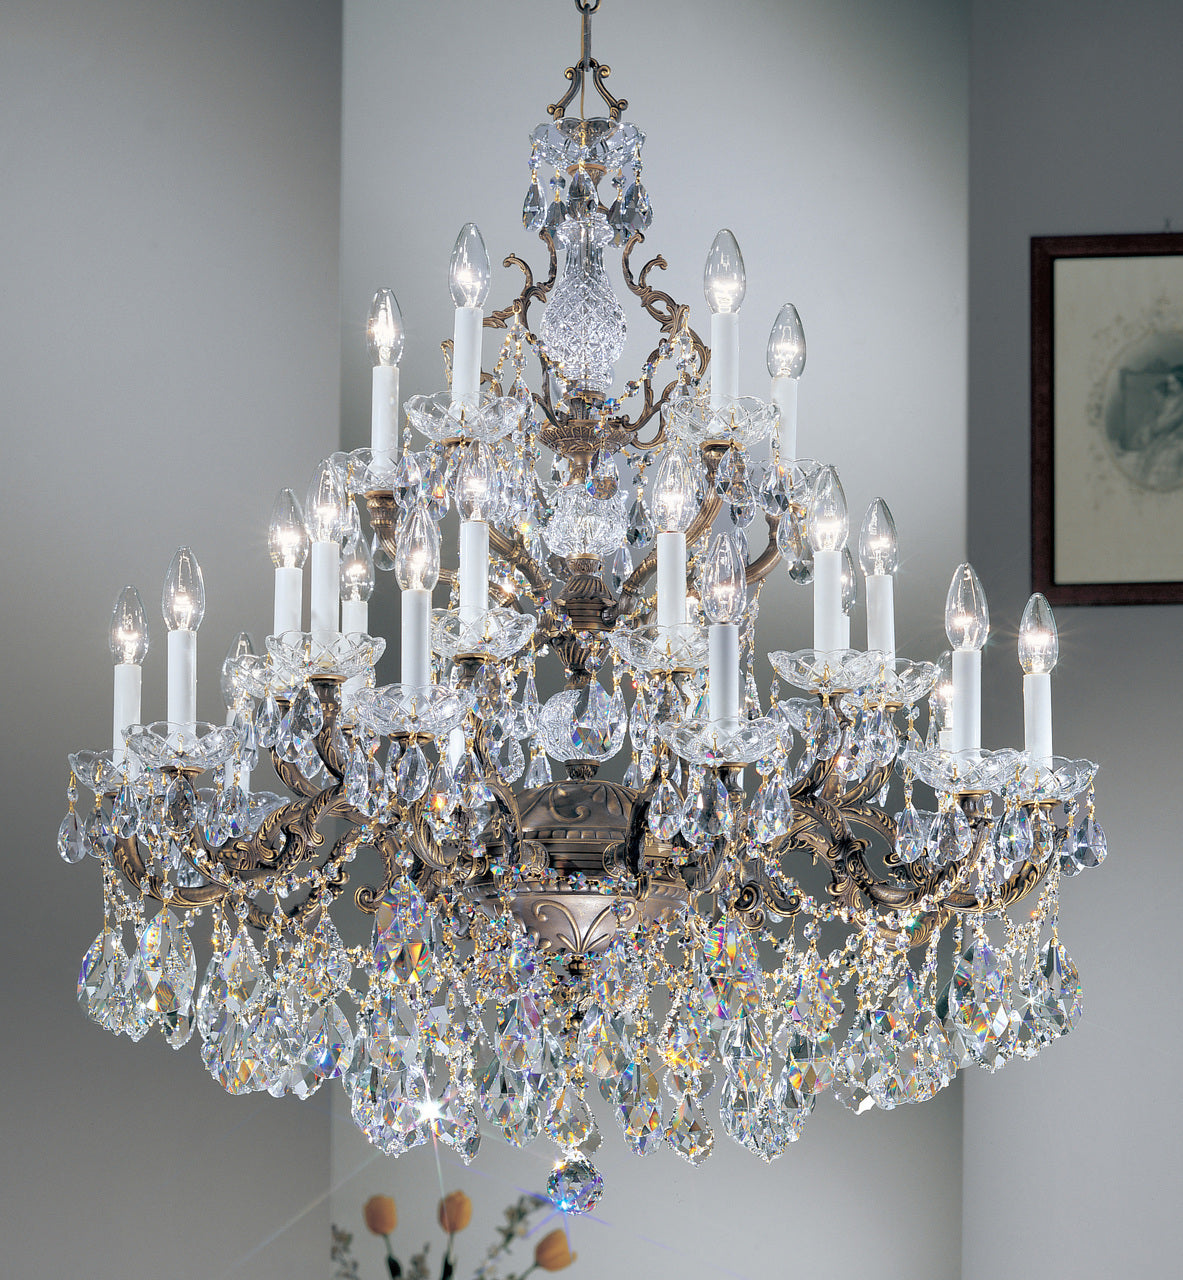 Classic Lighting 5545 RB C Madrid Imperial Crystal/Cast Brass Chandelier in Roman Bronze (Imported from Spain)